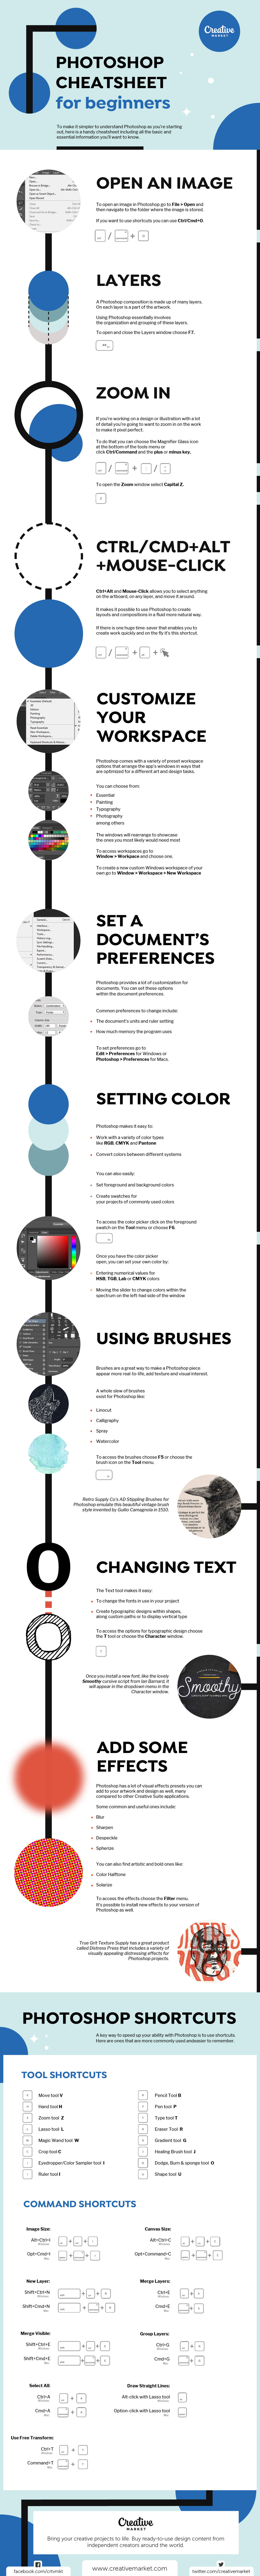 No More Hiccups: The Ultimate Photoshop Cheat-Sheet - Infographic